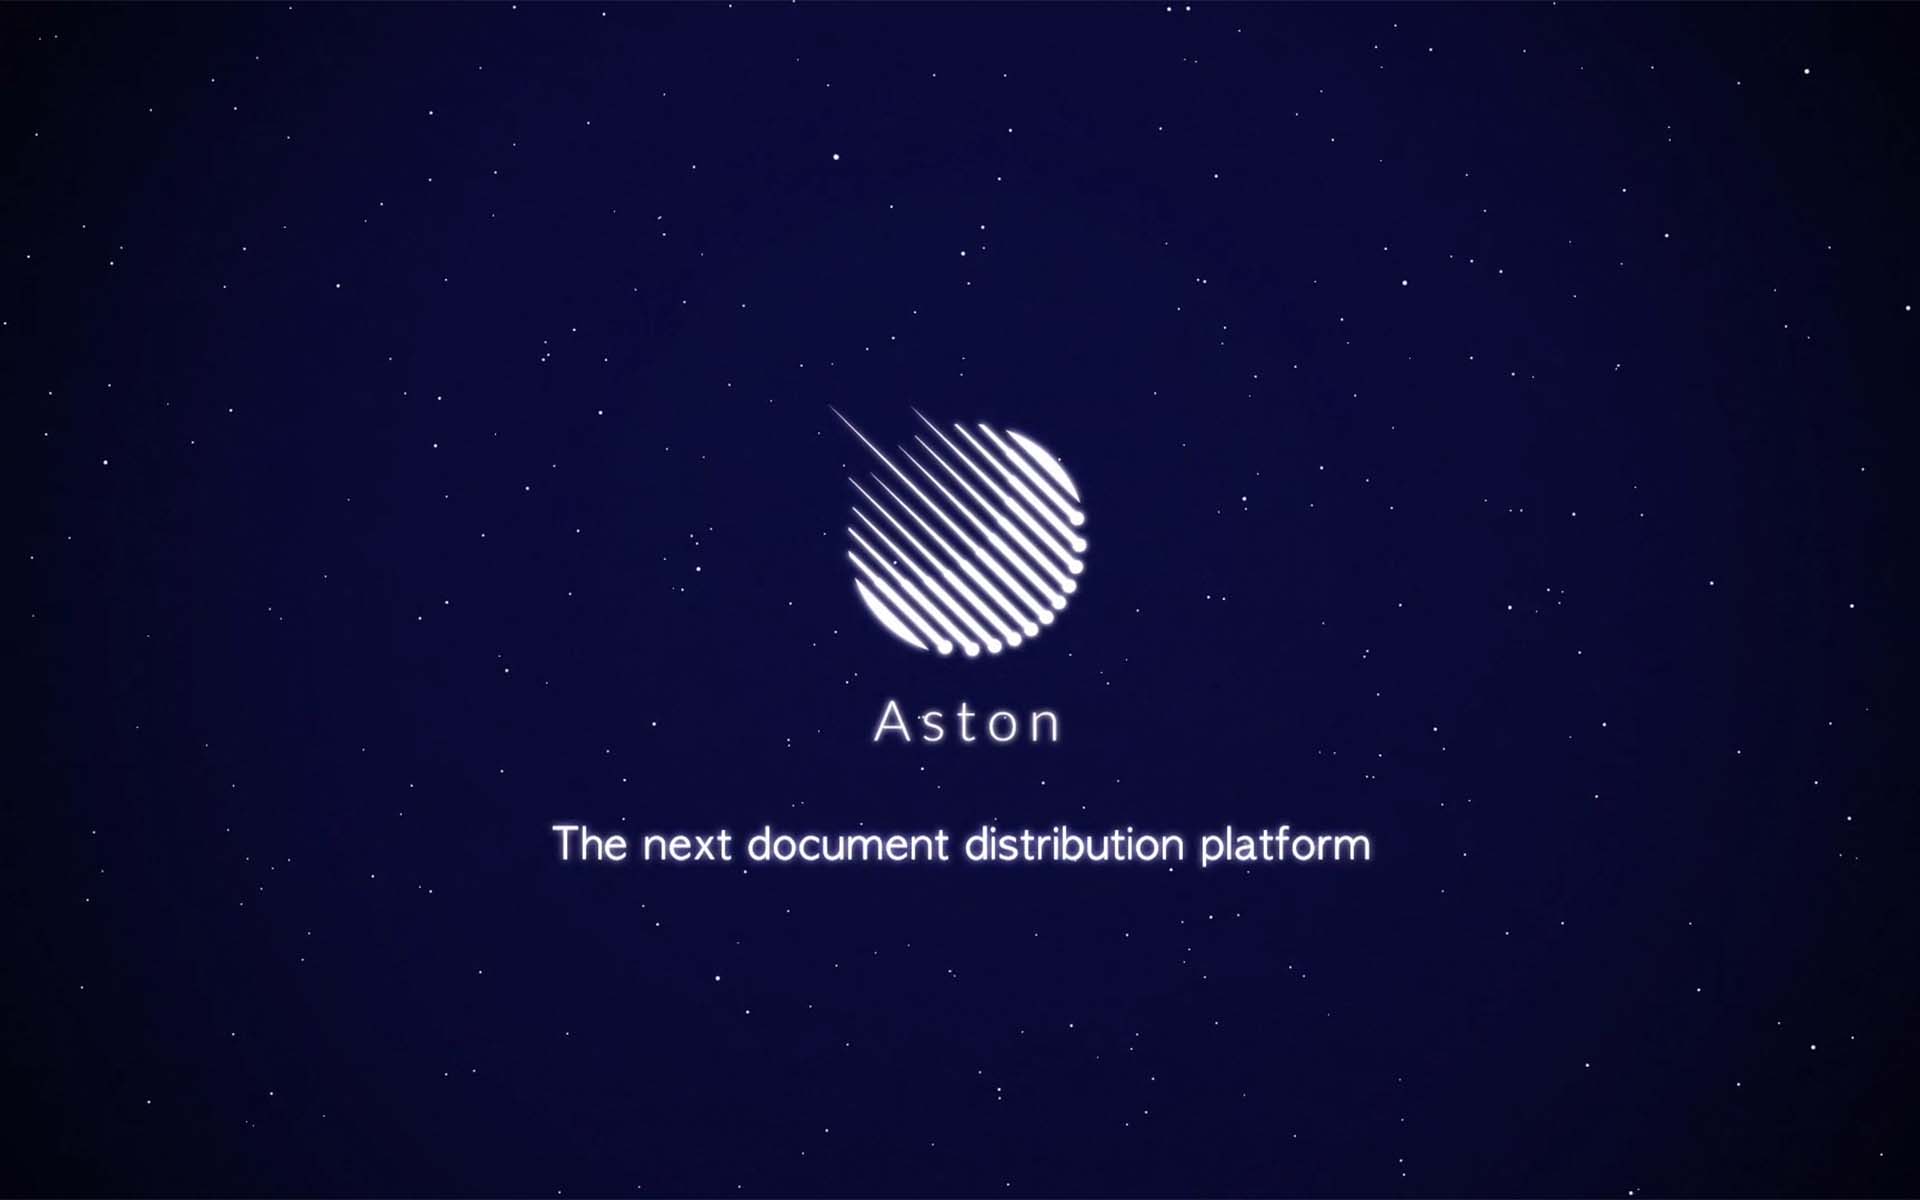 Aston Shakes Up Document Distribution Industry With Launch Of ICO & Next Generation Fully Automated Document Distribution Platform Based On BlockChain Technology